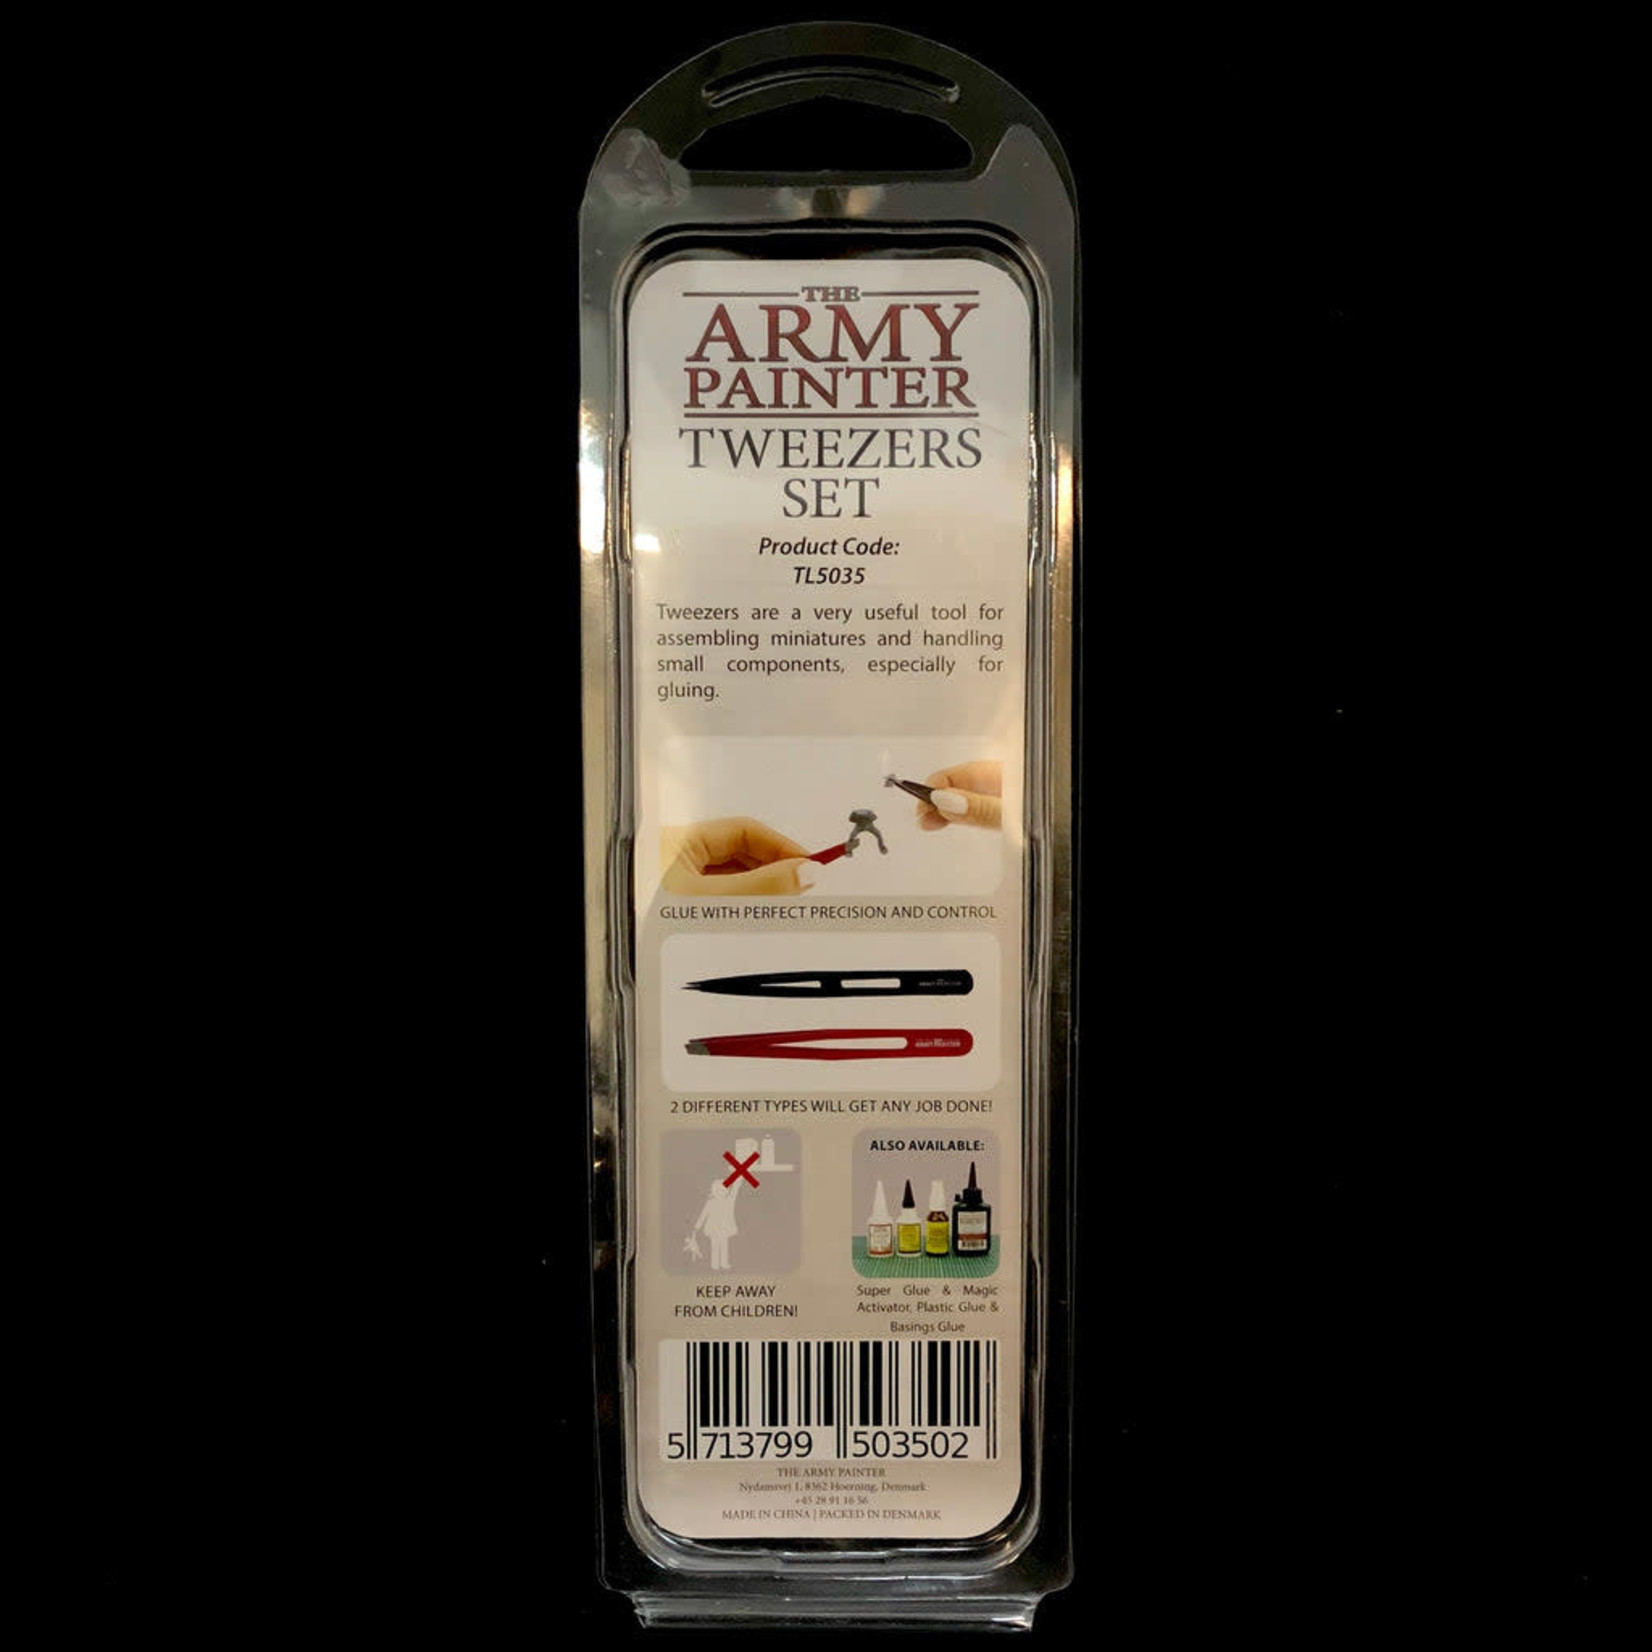 The Army Painter The Army Painter Tweezer Set